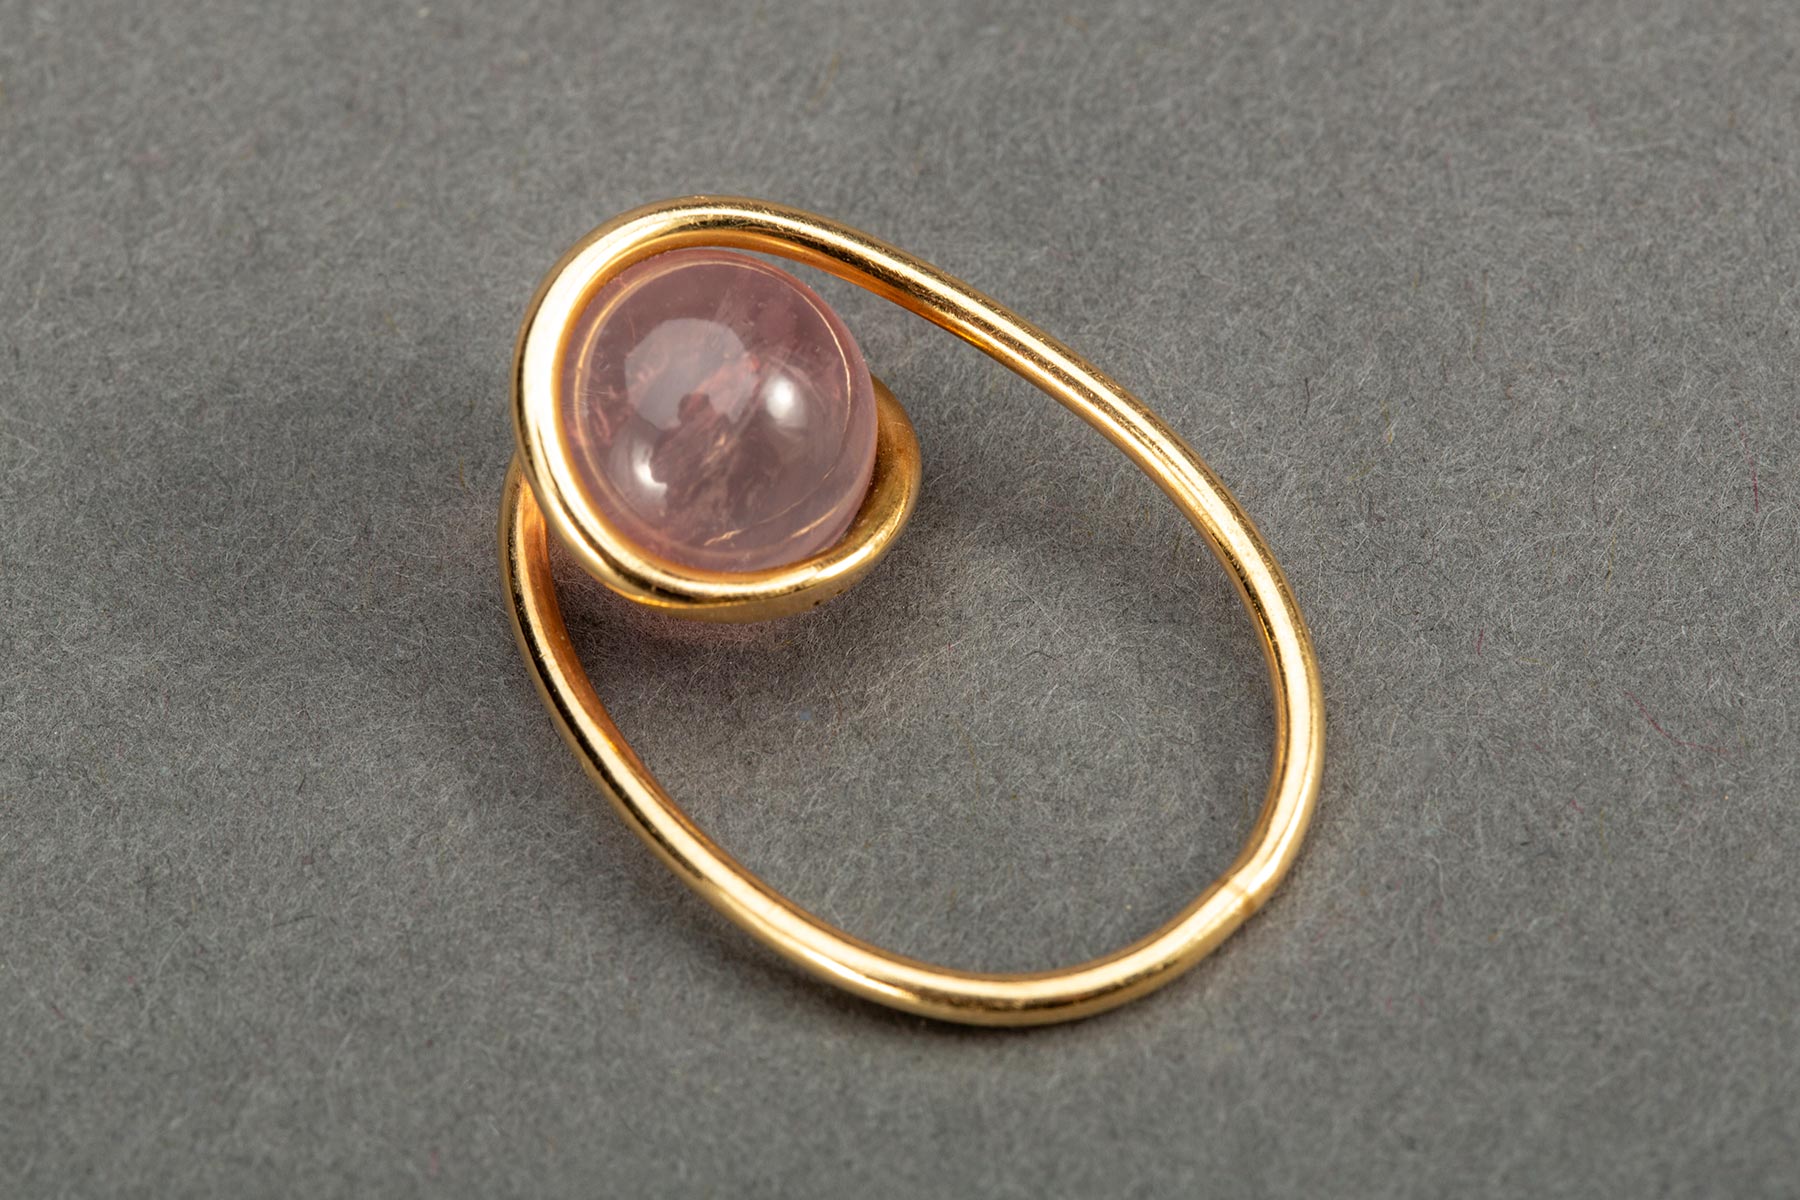 Thin and shiny gold wire organically formed around a round, pink-colored piece of rose quartz